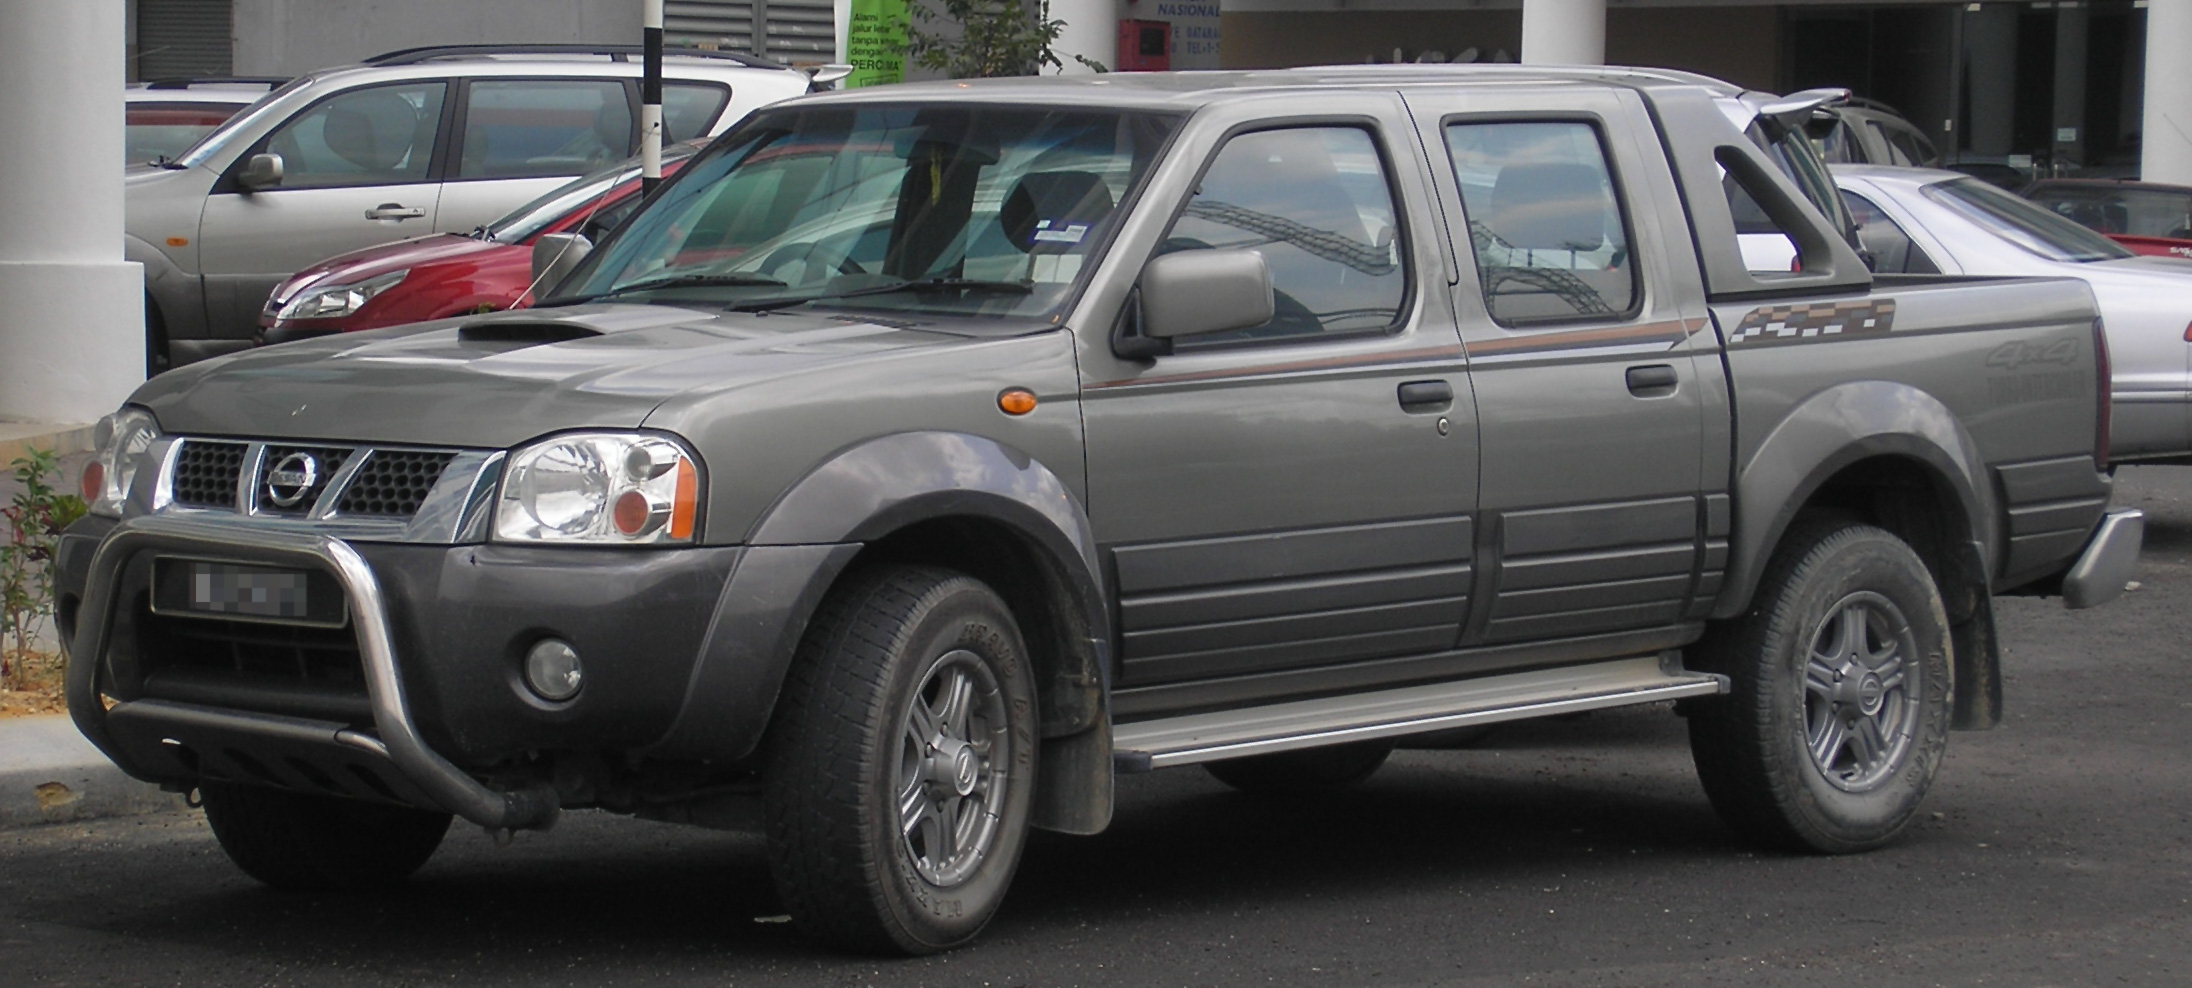 Nissan frontier malaysia #1